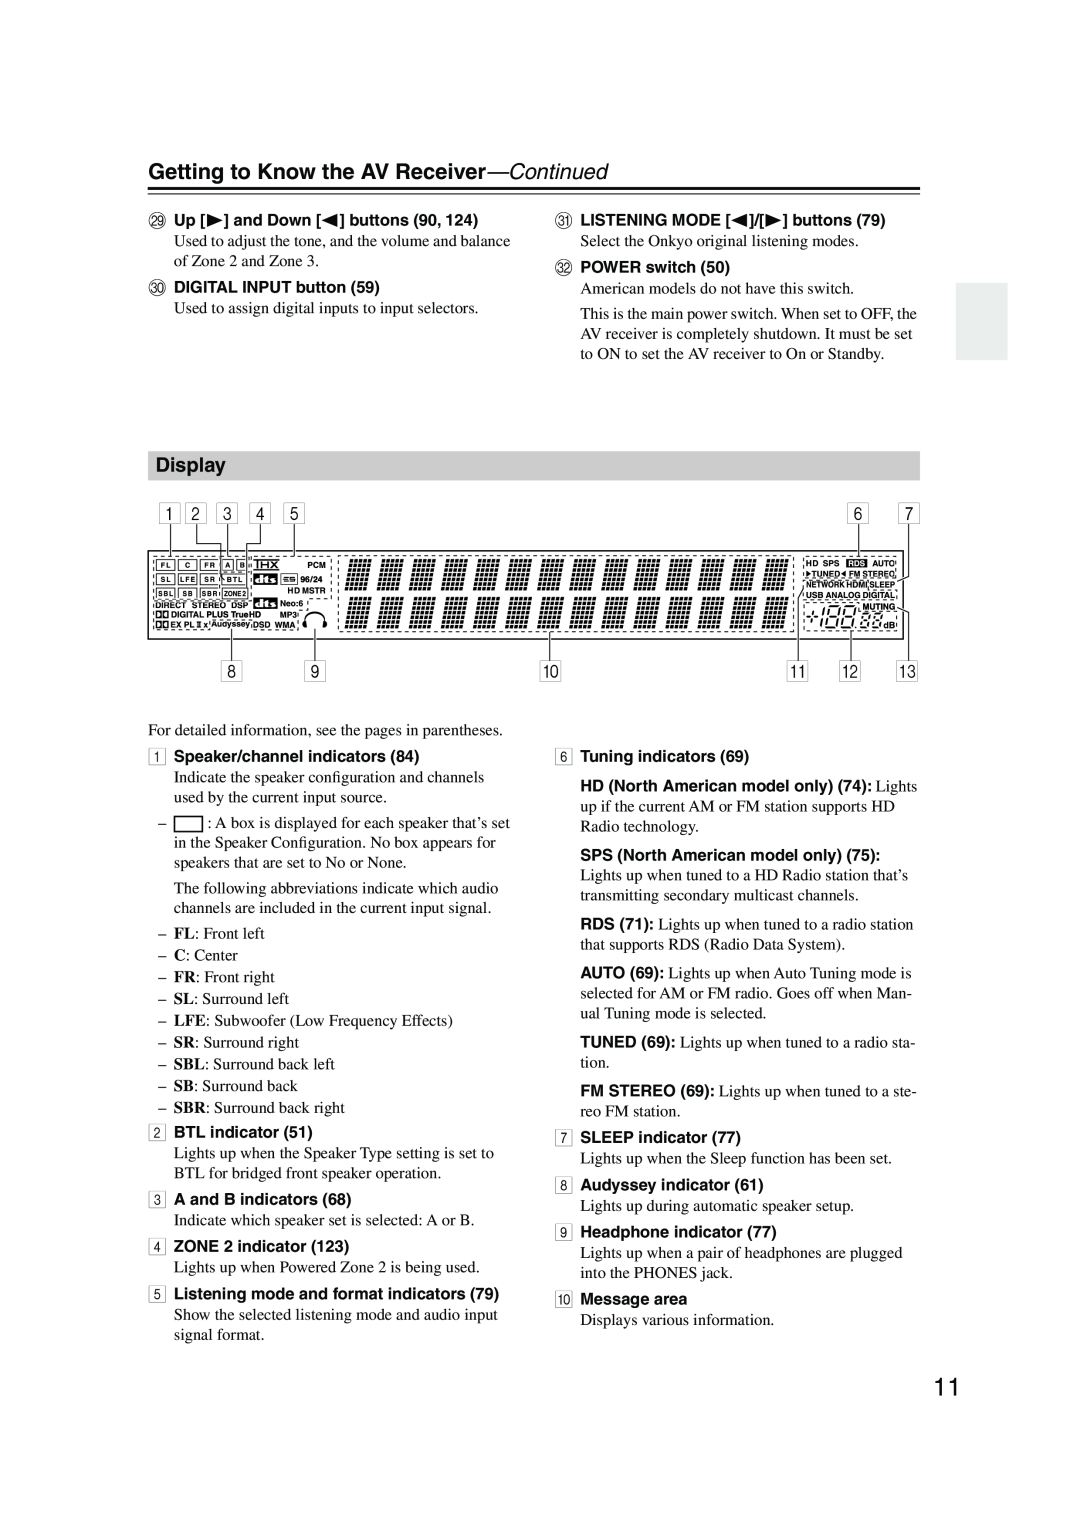 Onkyo TX-NR905 instruction manual Display, 1 2 3, A B C, Getting to Know the AV Receiver—Continued 